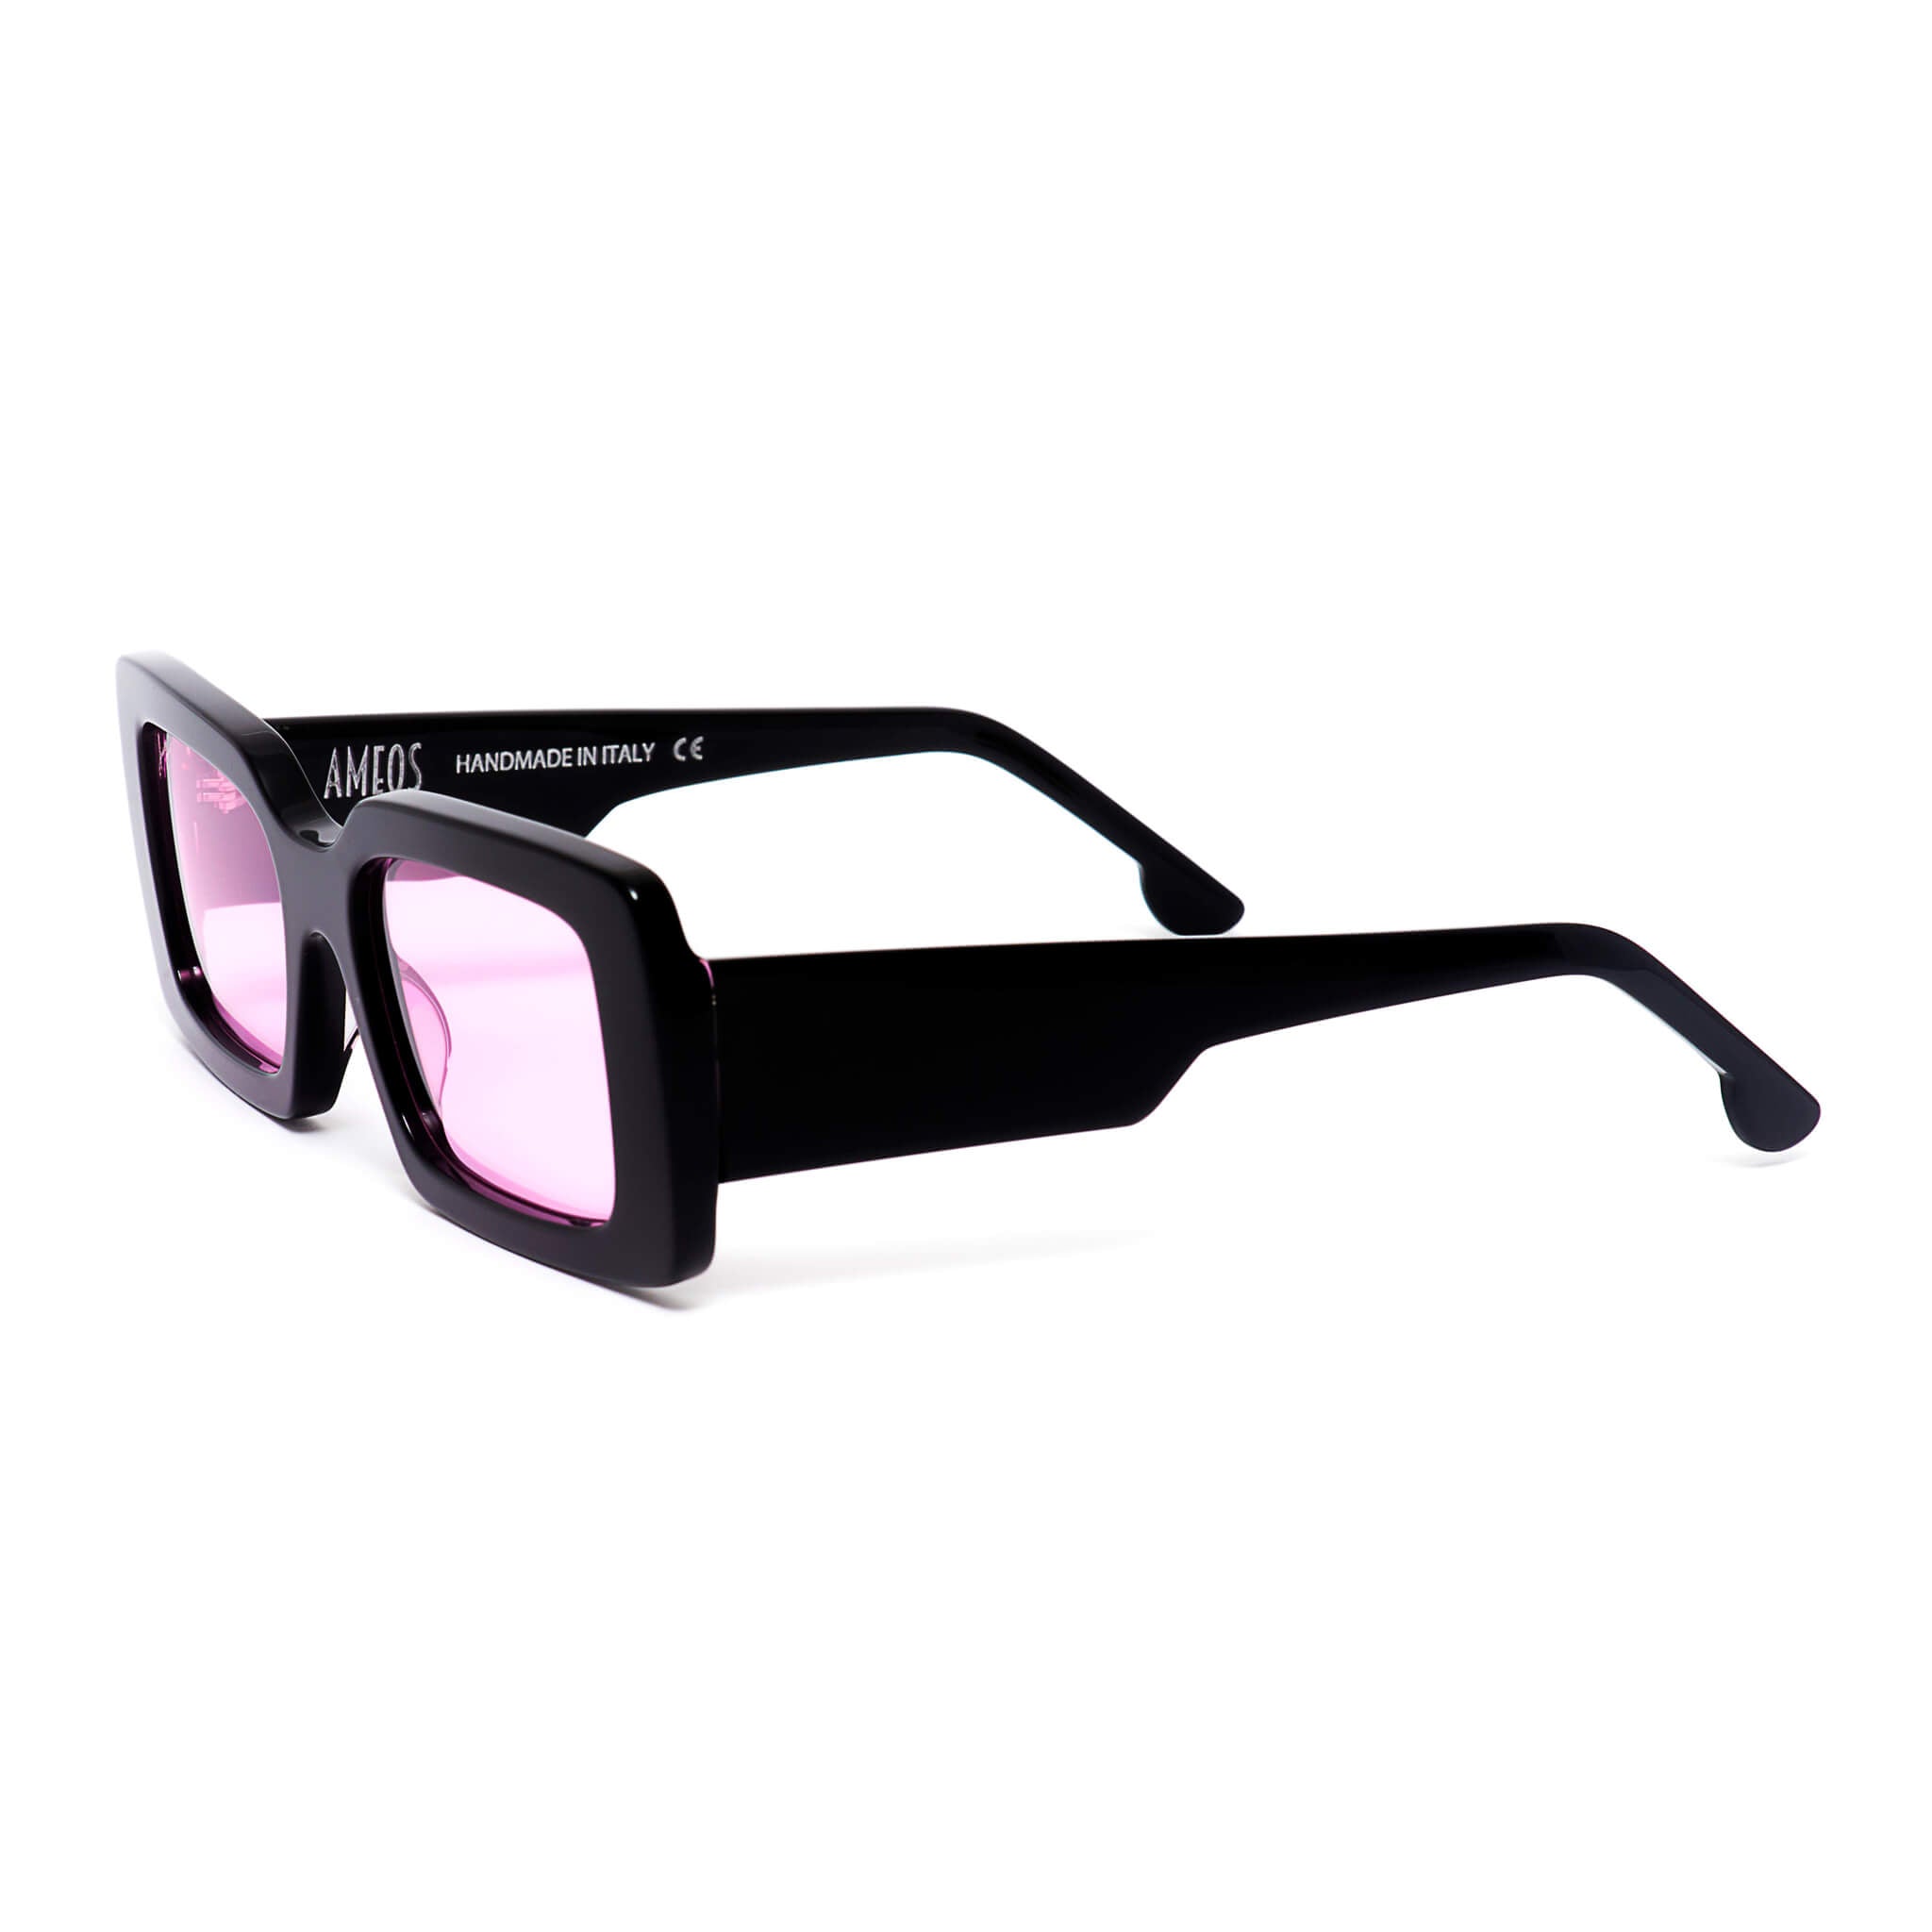 Black sunglasses frames with pink lenses handmade in italy